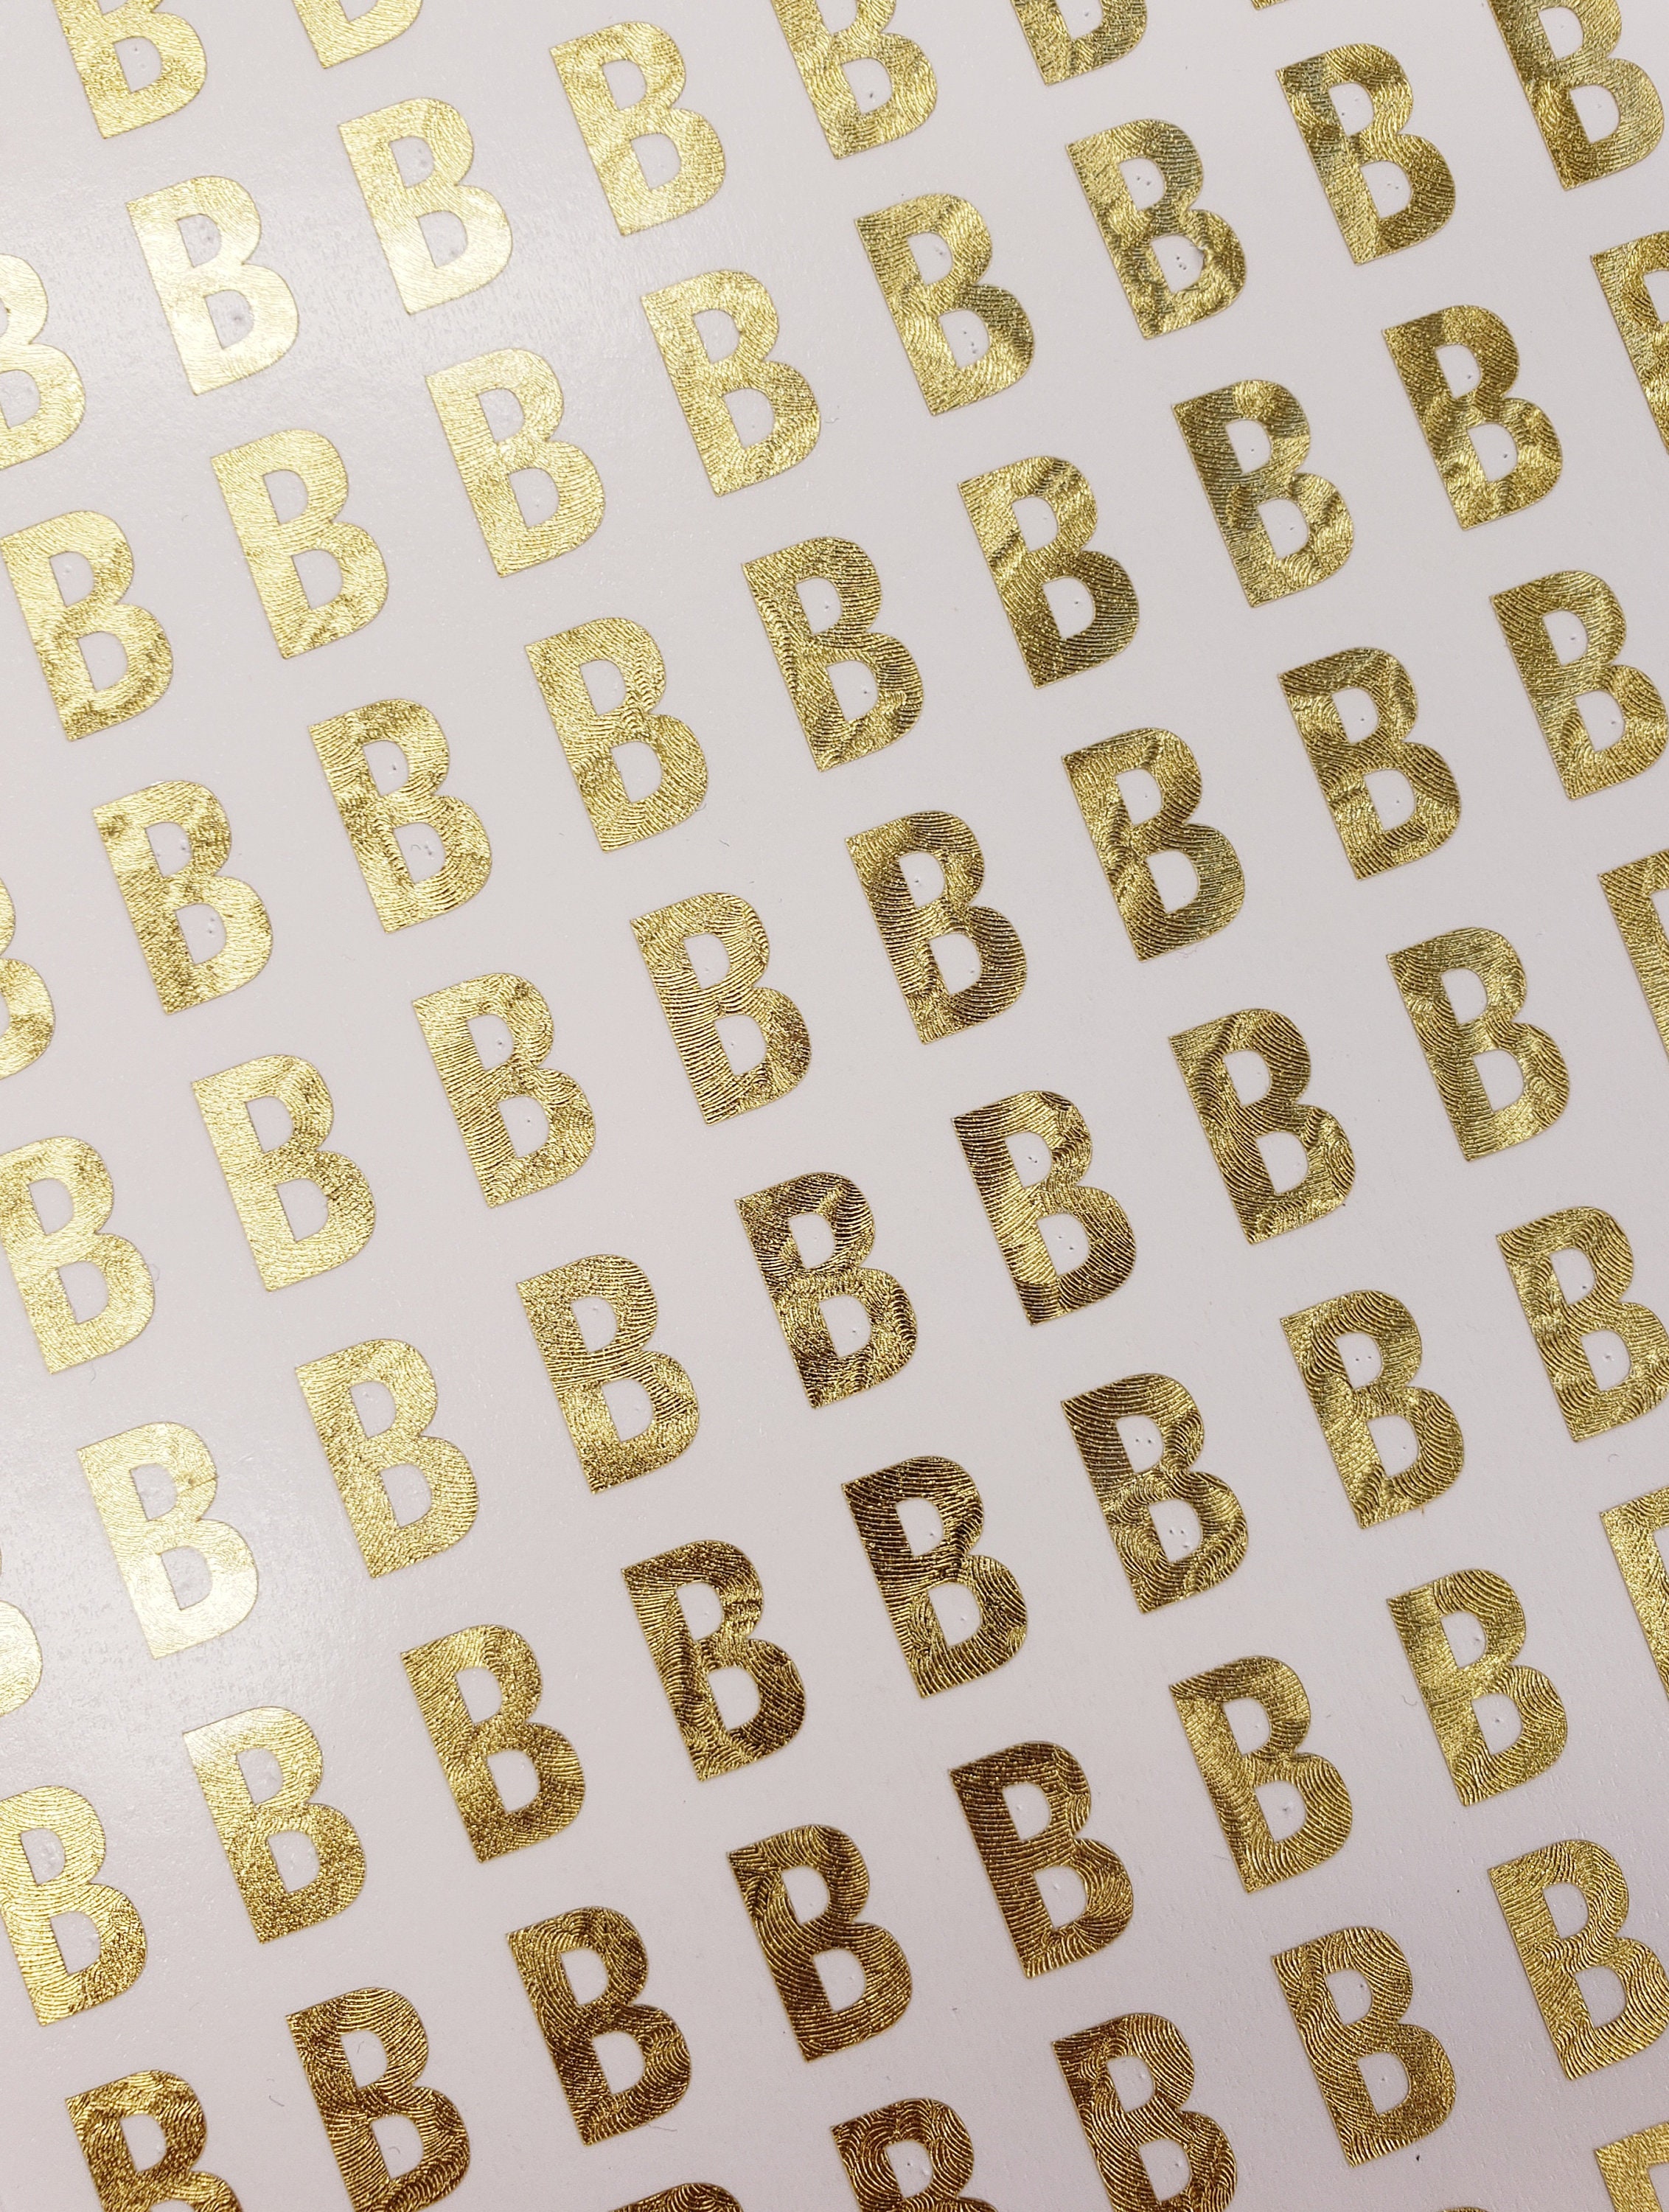 Gold Letter Stickers, Set of 50, 100 or 200 Single Letter or Number Decals,  Wedding Meal Choice Vinyl Stickers, Tiny Gold Alphabet Stickers 